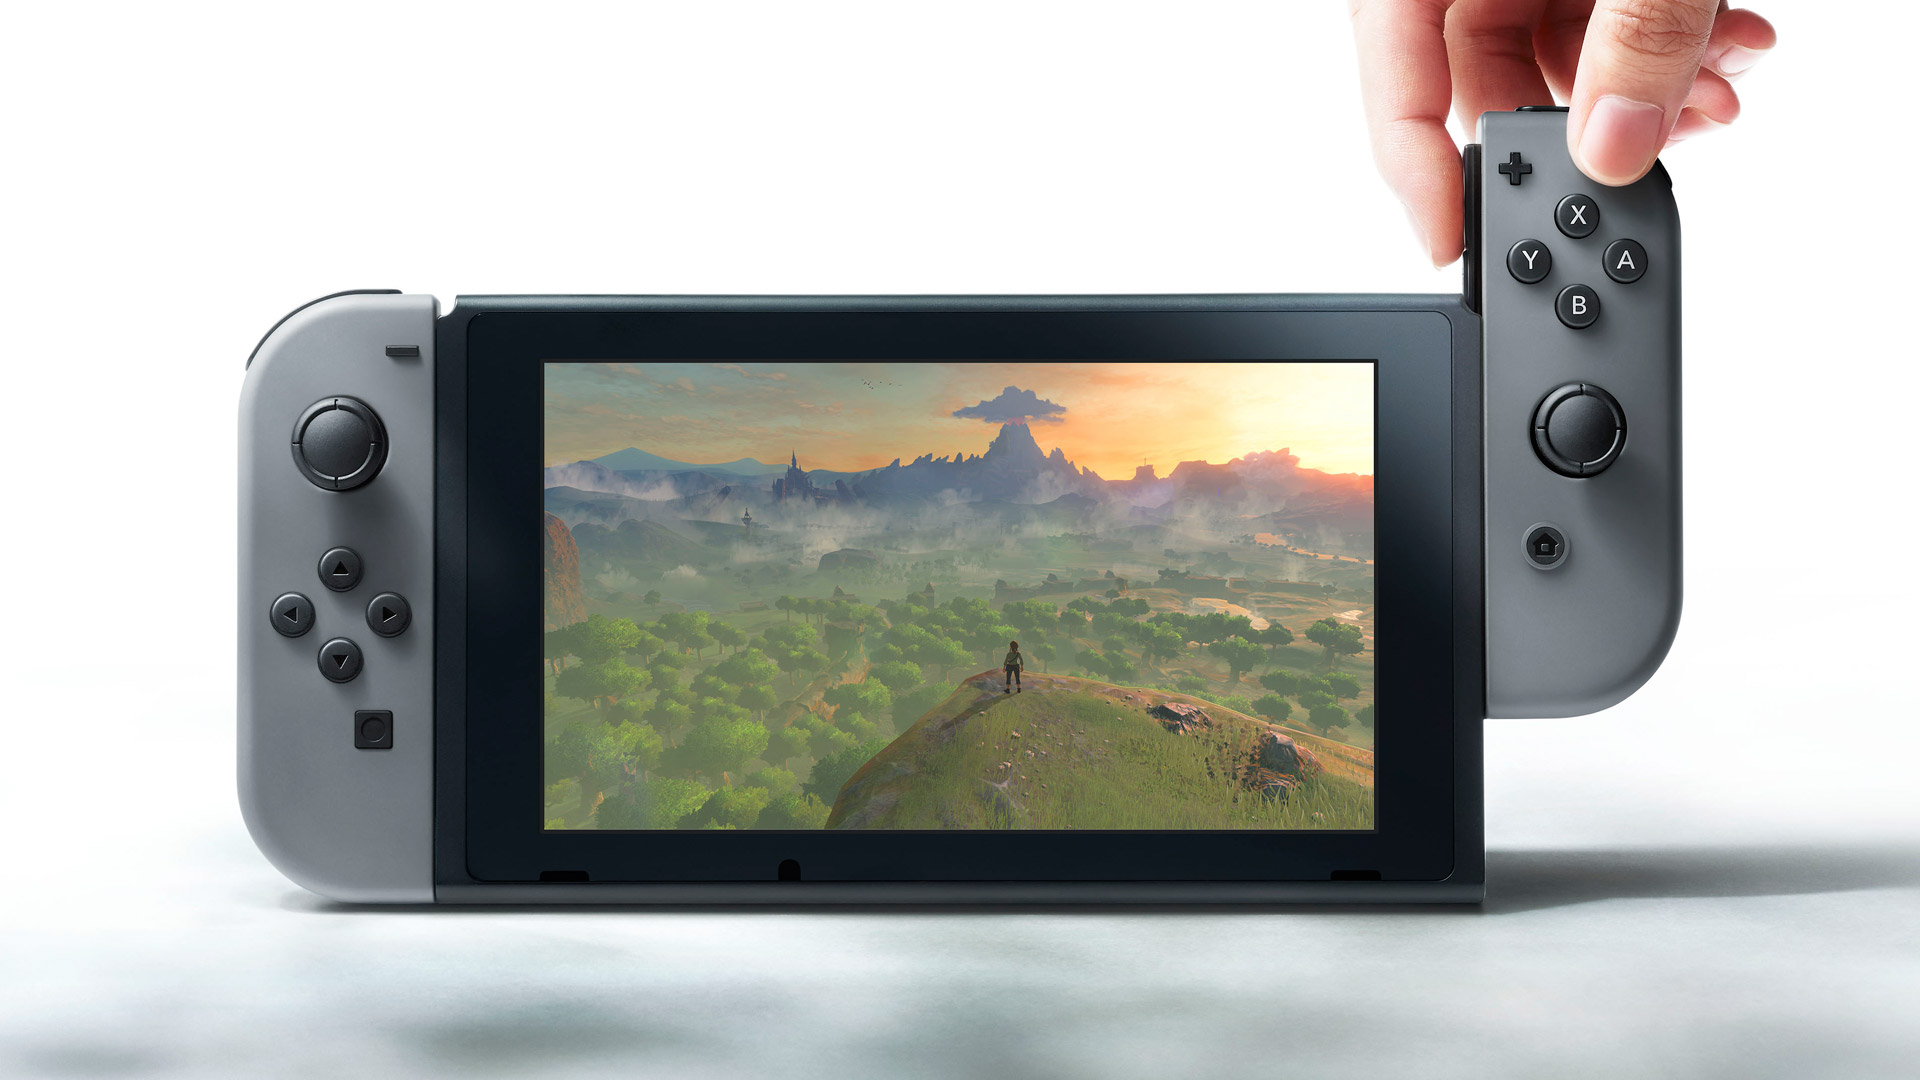 Promotional image released by Nintendo, showcasing the option to attach and detach the controllers to the screen.